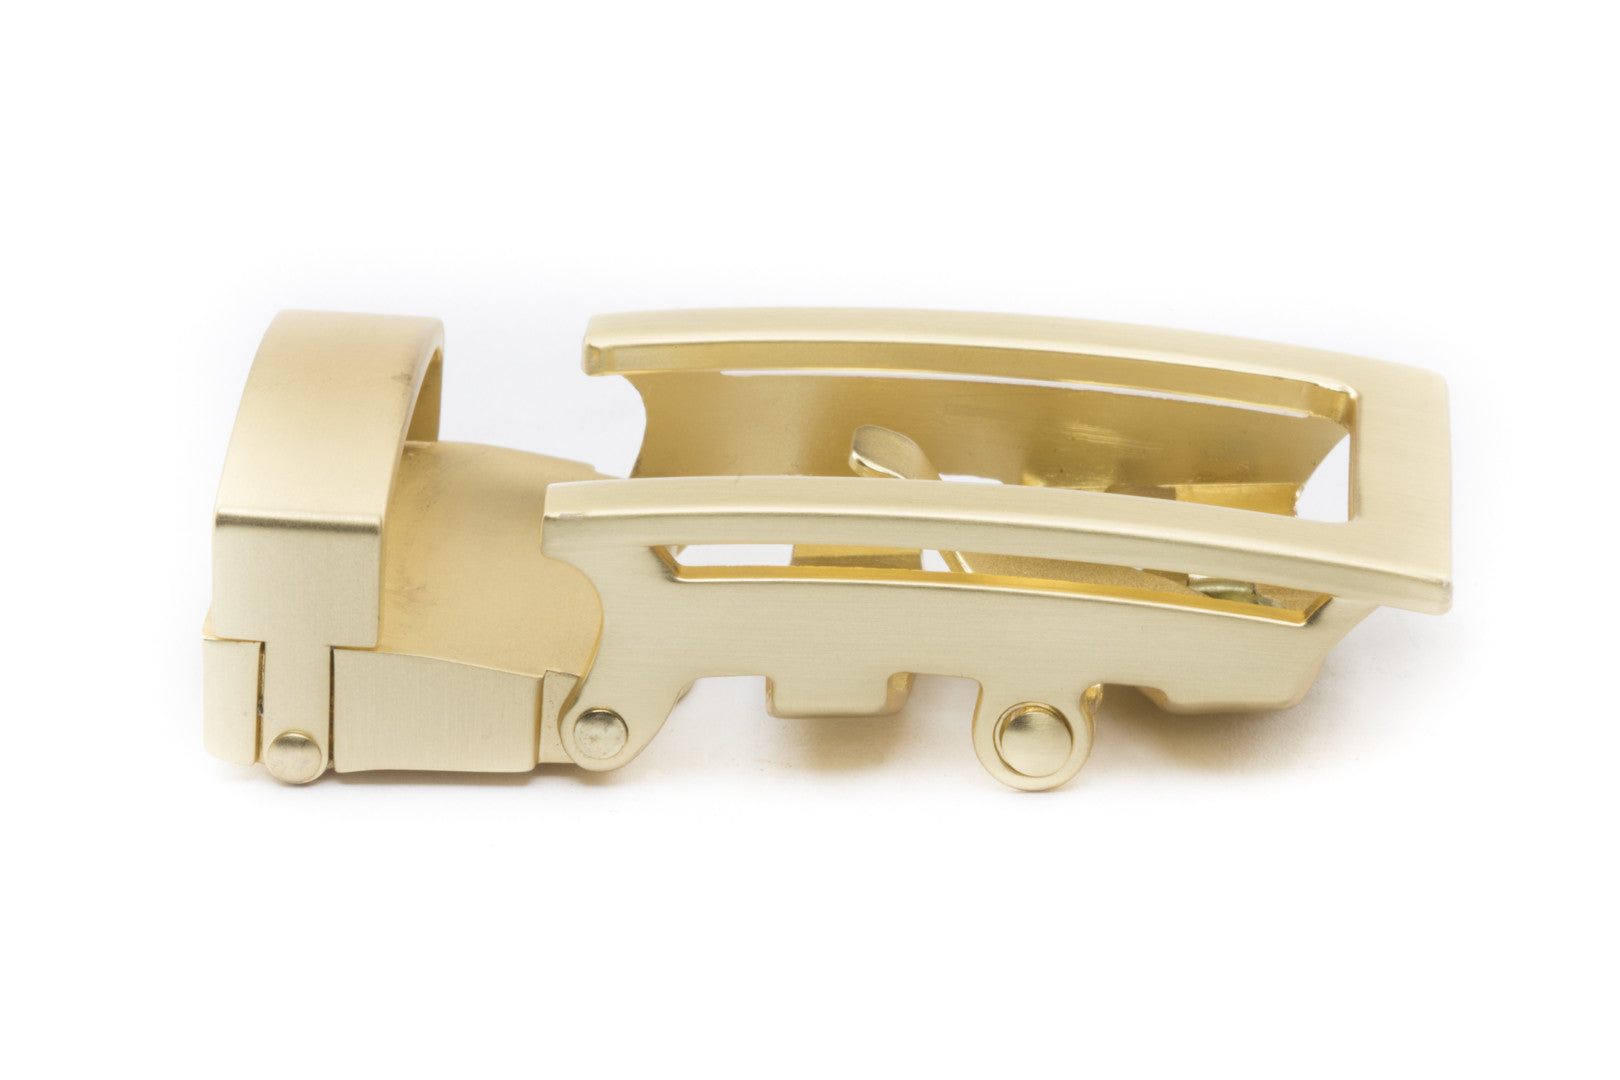 Men's traditional ratchet belt buckle in matte gold with a 1.25-inch width, right side view.